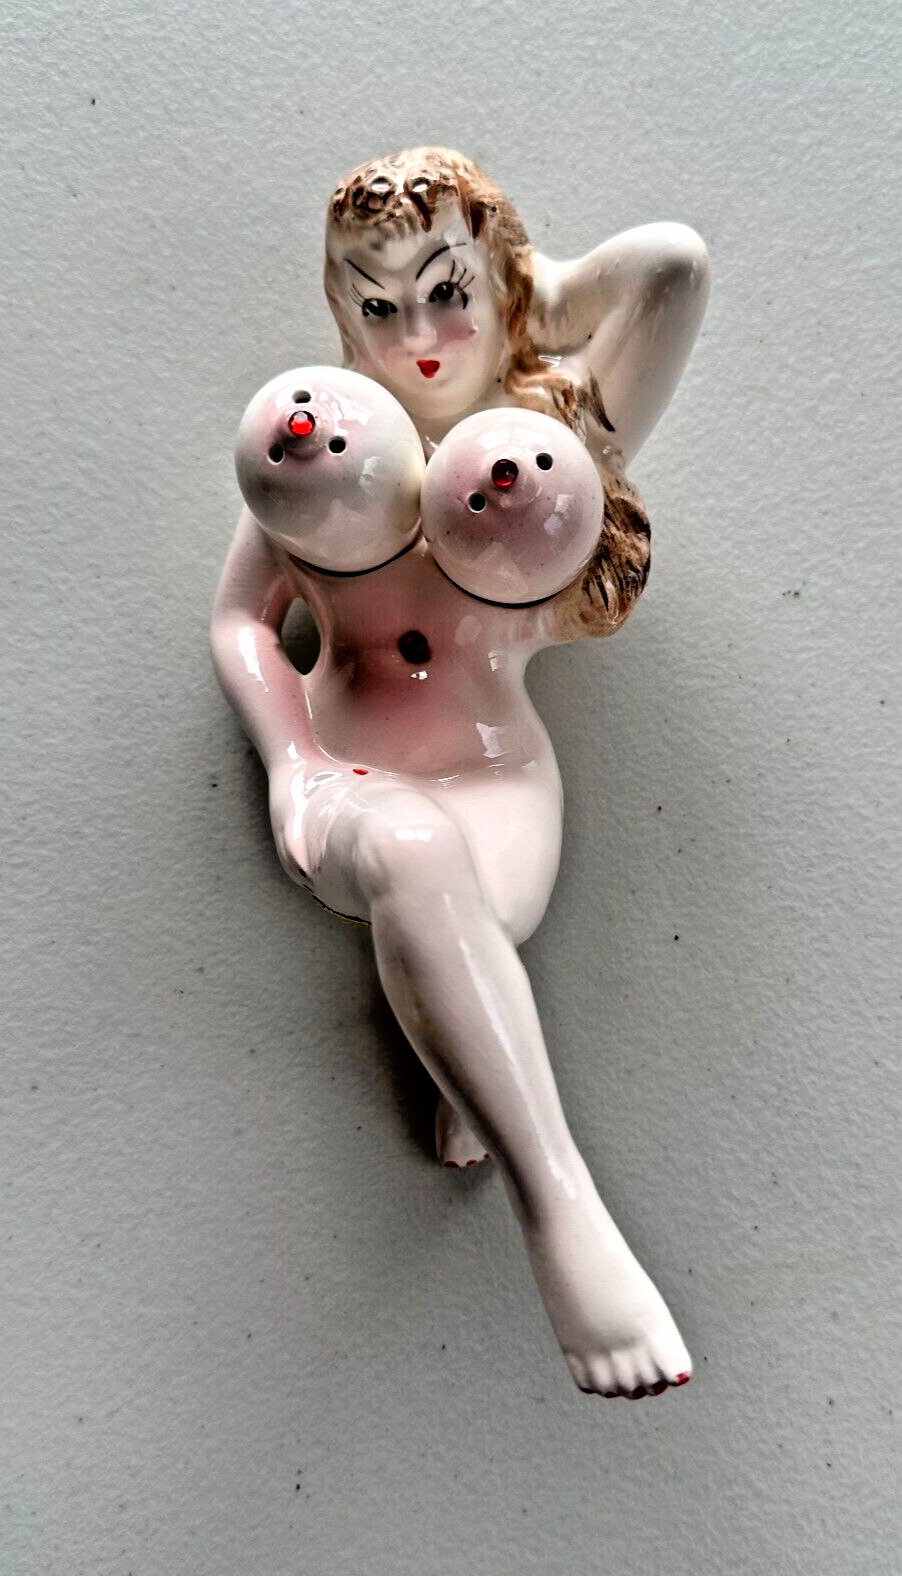 1950's Naughty Naked “Spice Of life” Lady Boobs Salt & Pepper Shakers Japan